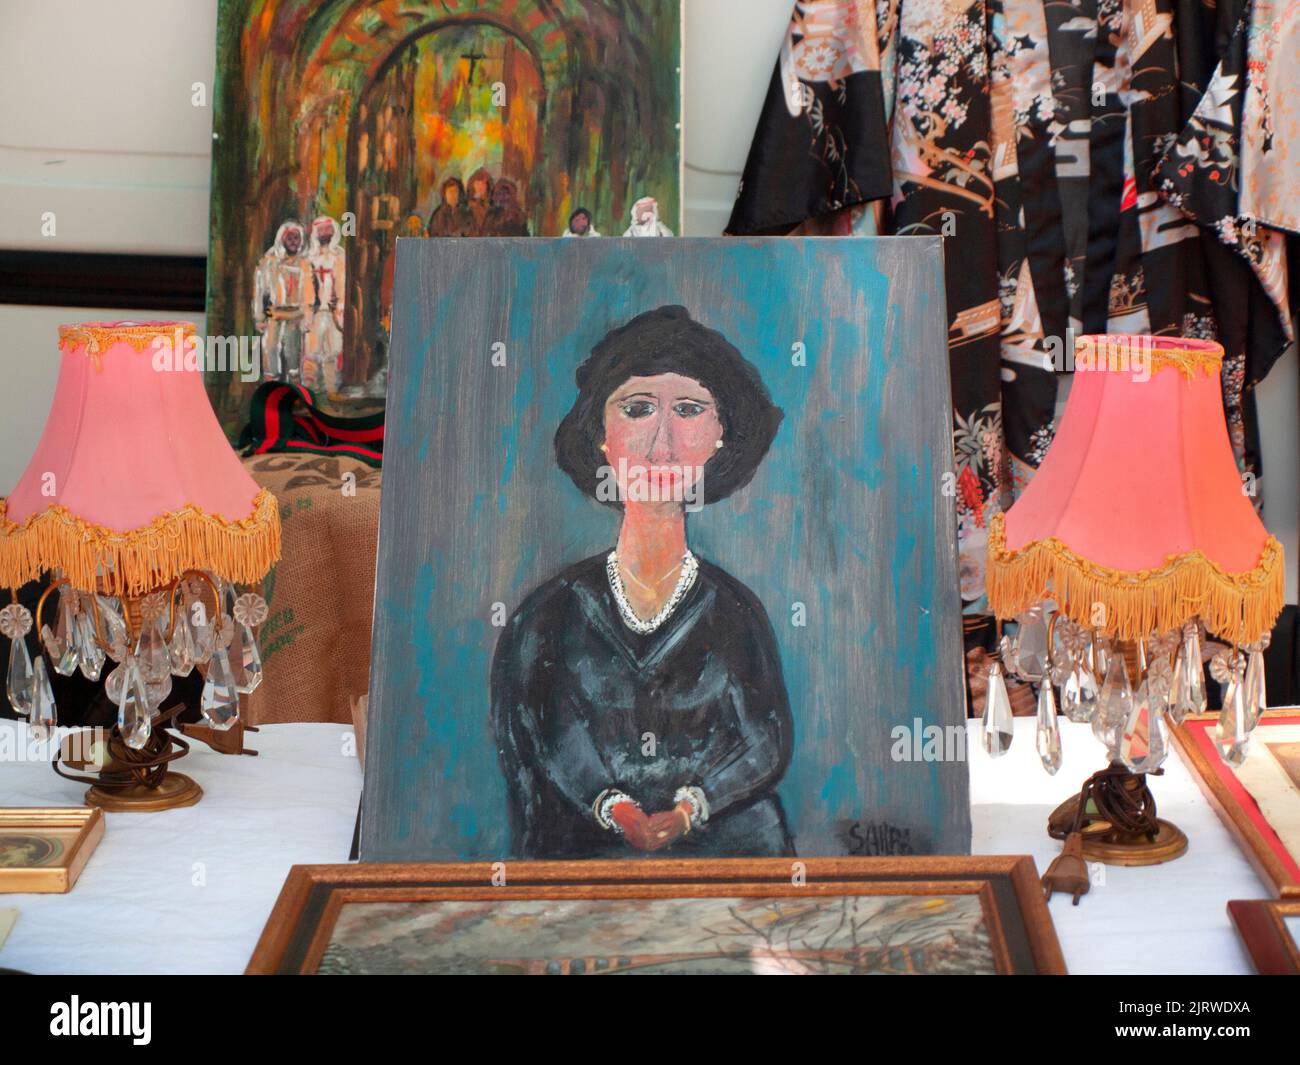 A painting for sale at the market in Saint-Chinian, Languedoc-Rousillon, France Stock Photo